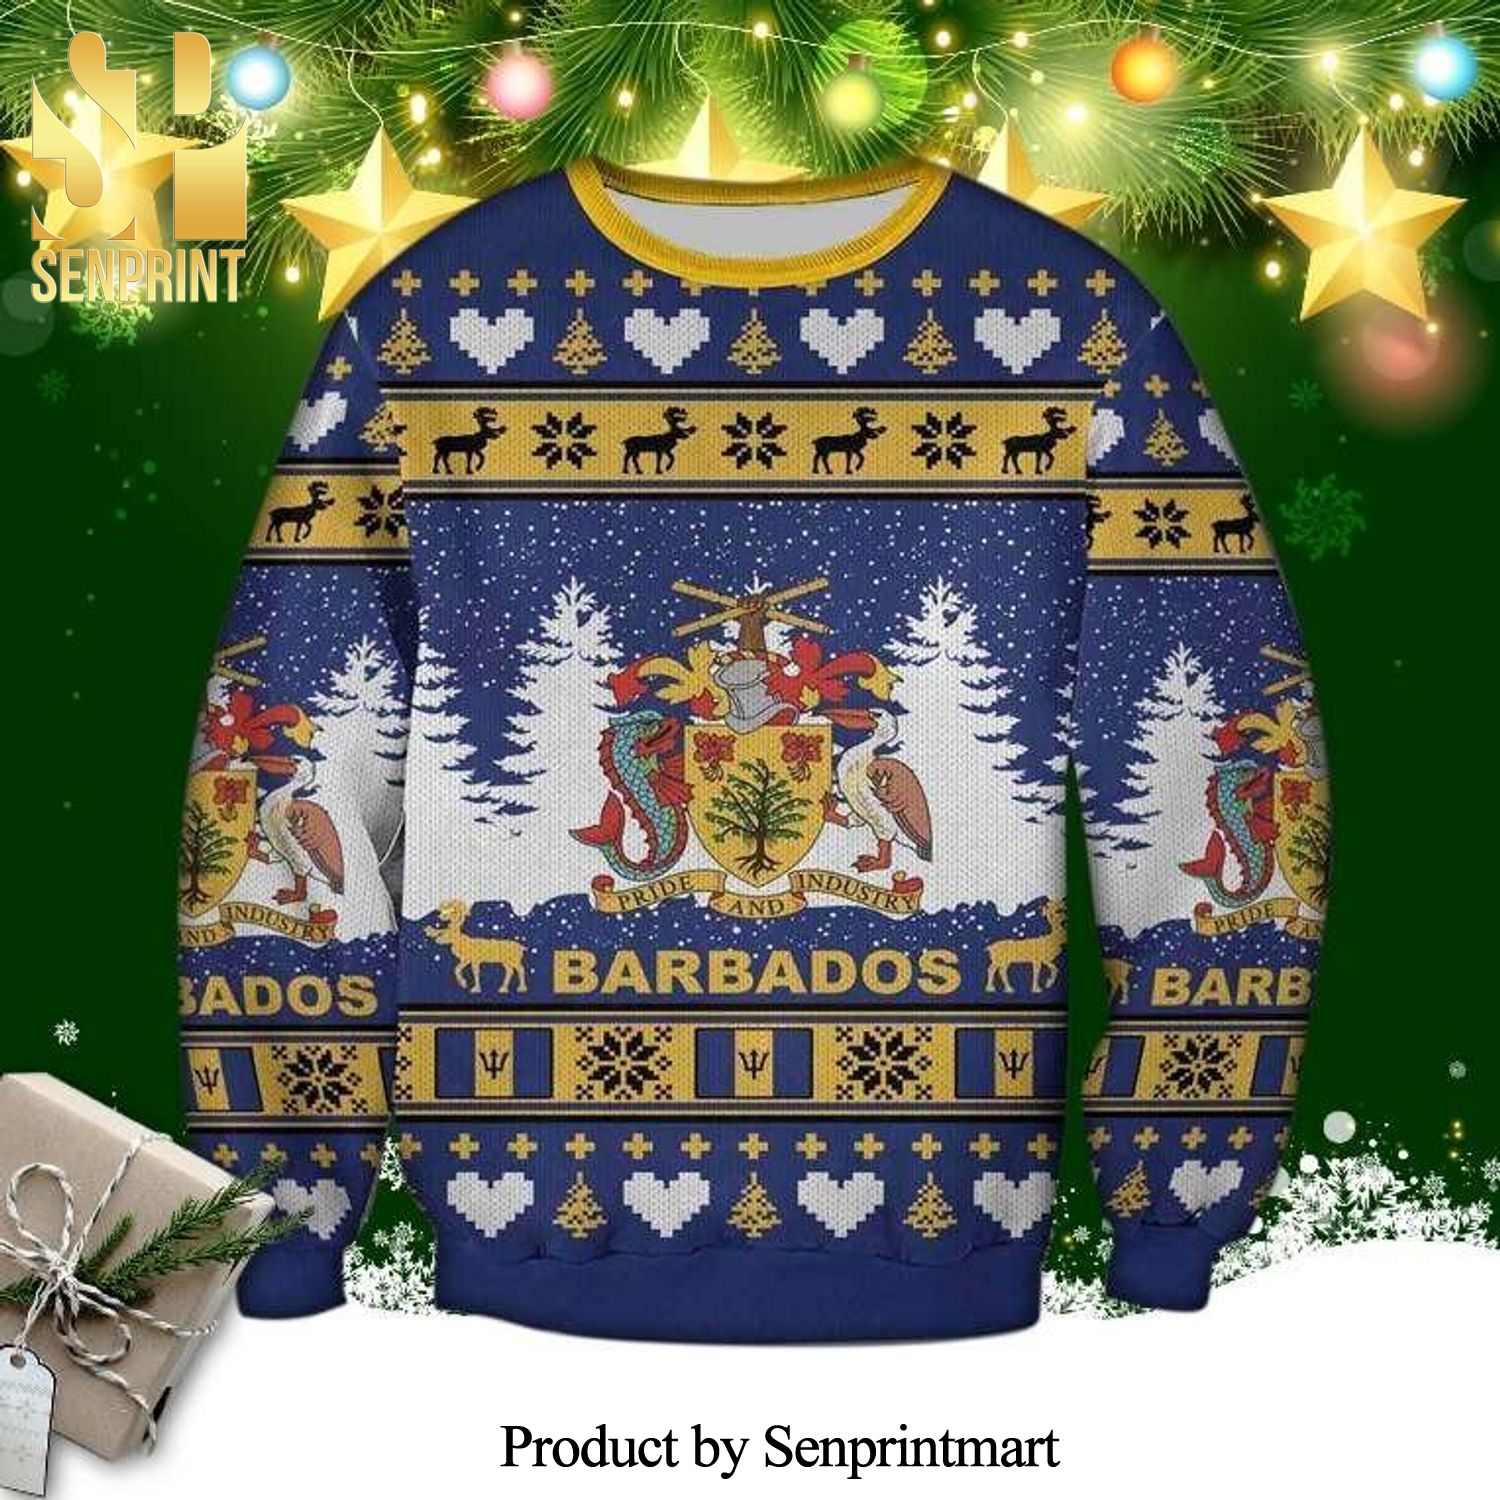 Barbados Island – Pride And Industry Knitted Ugly Christmas Sweater